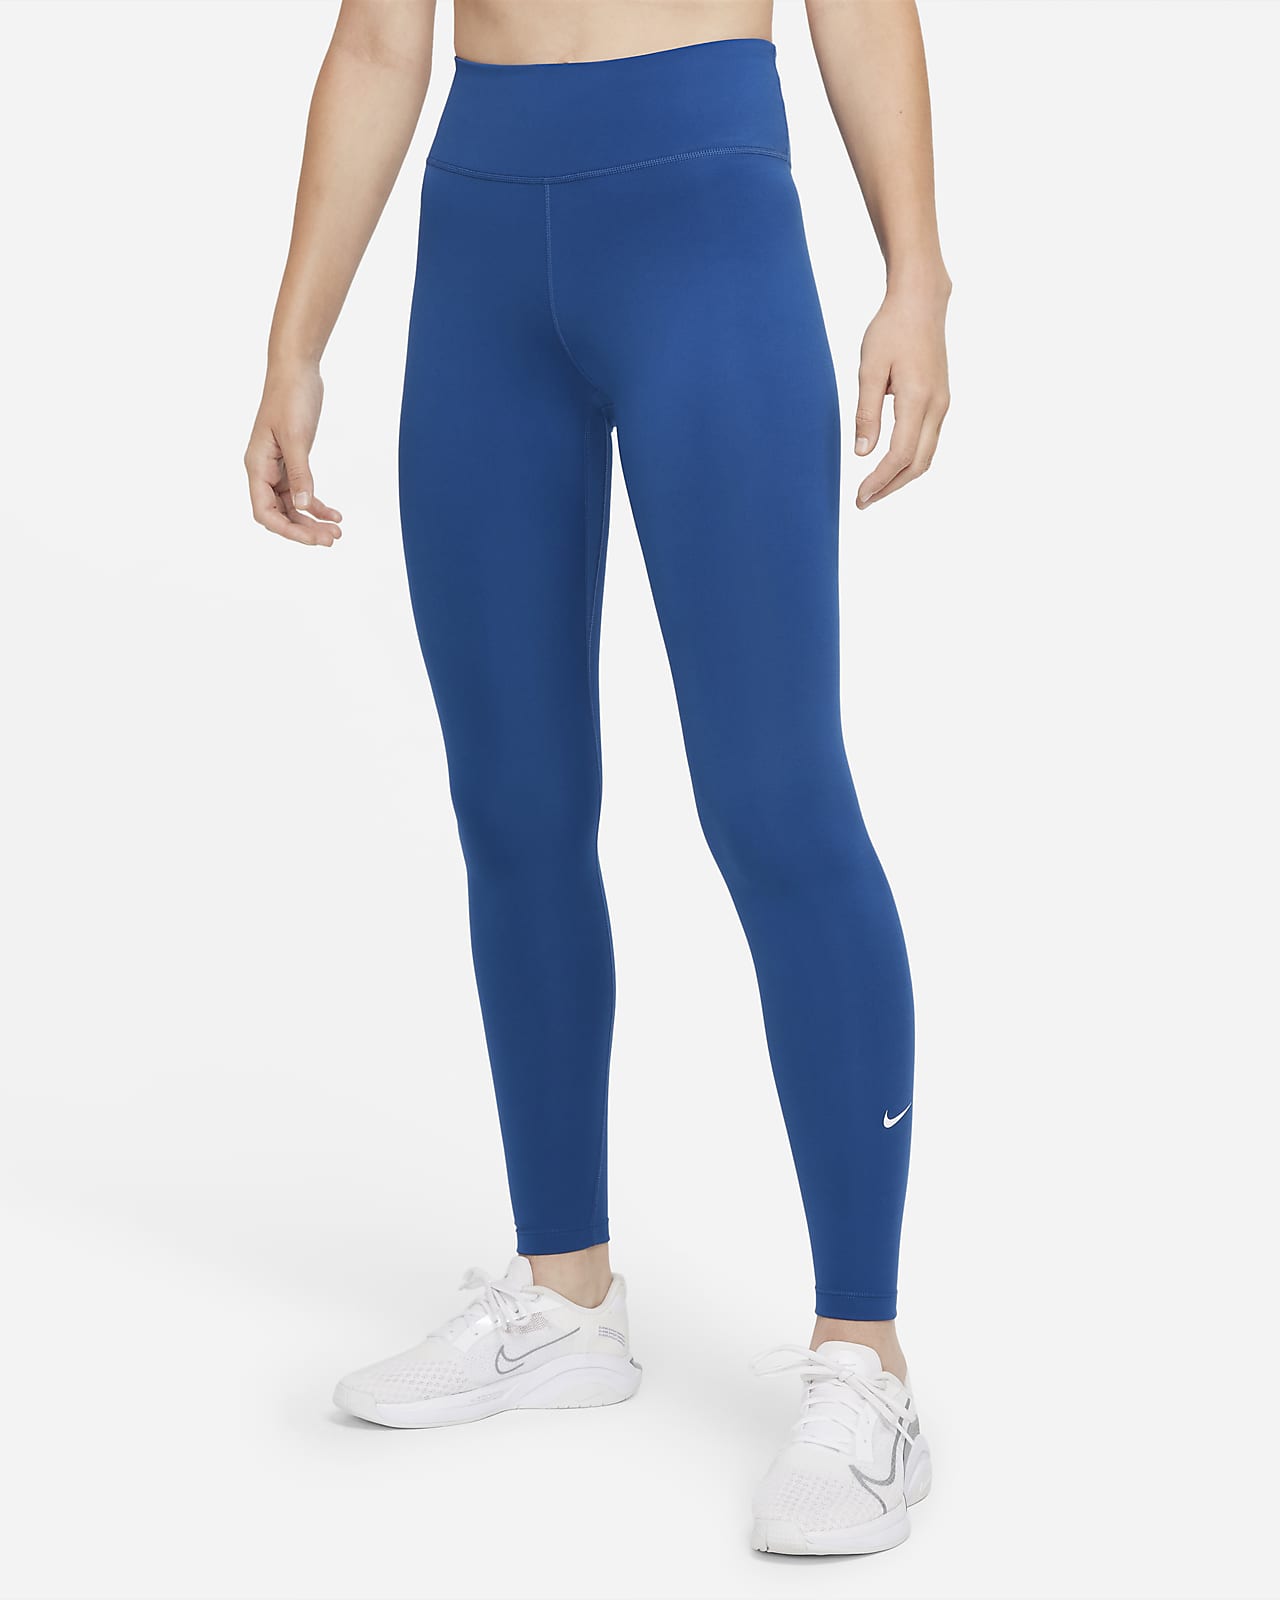 WOMEN'S NIKE ONE MID RISE TIGHTS - Pants - WOMEN'S - CLOTHING - BADMINTON